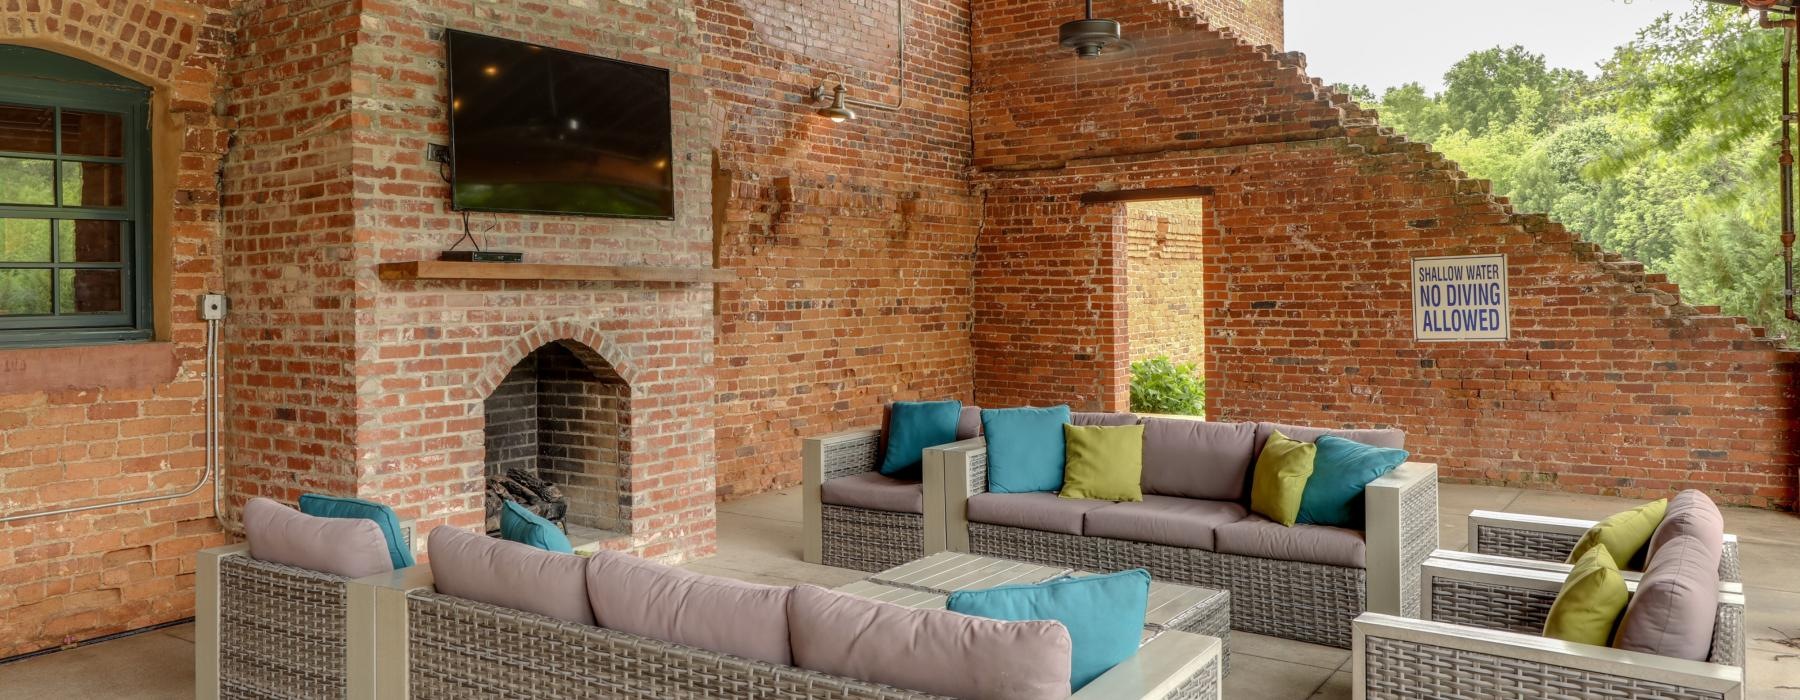 a brick building with a fireplace